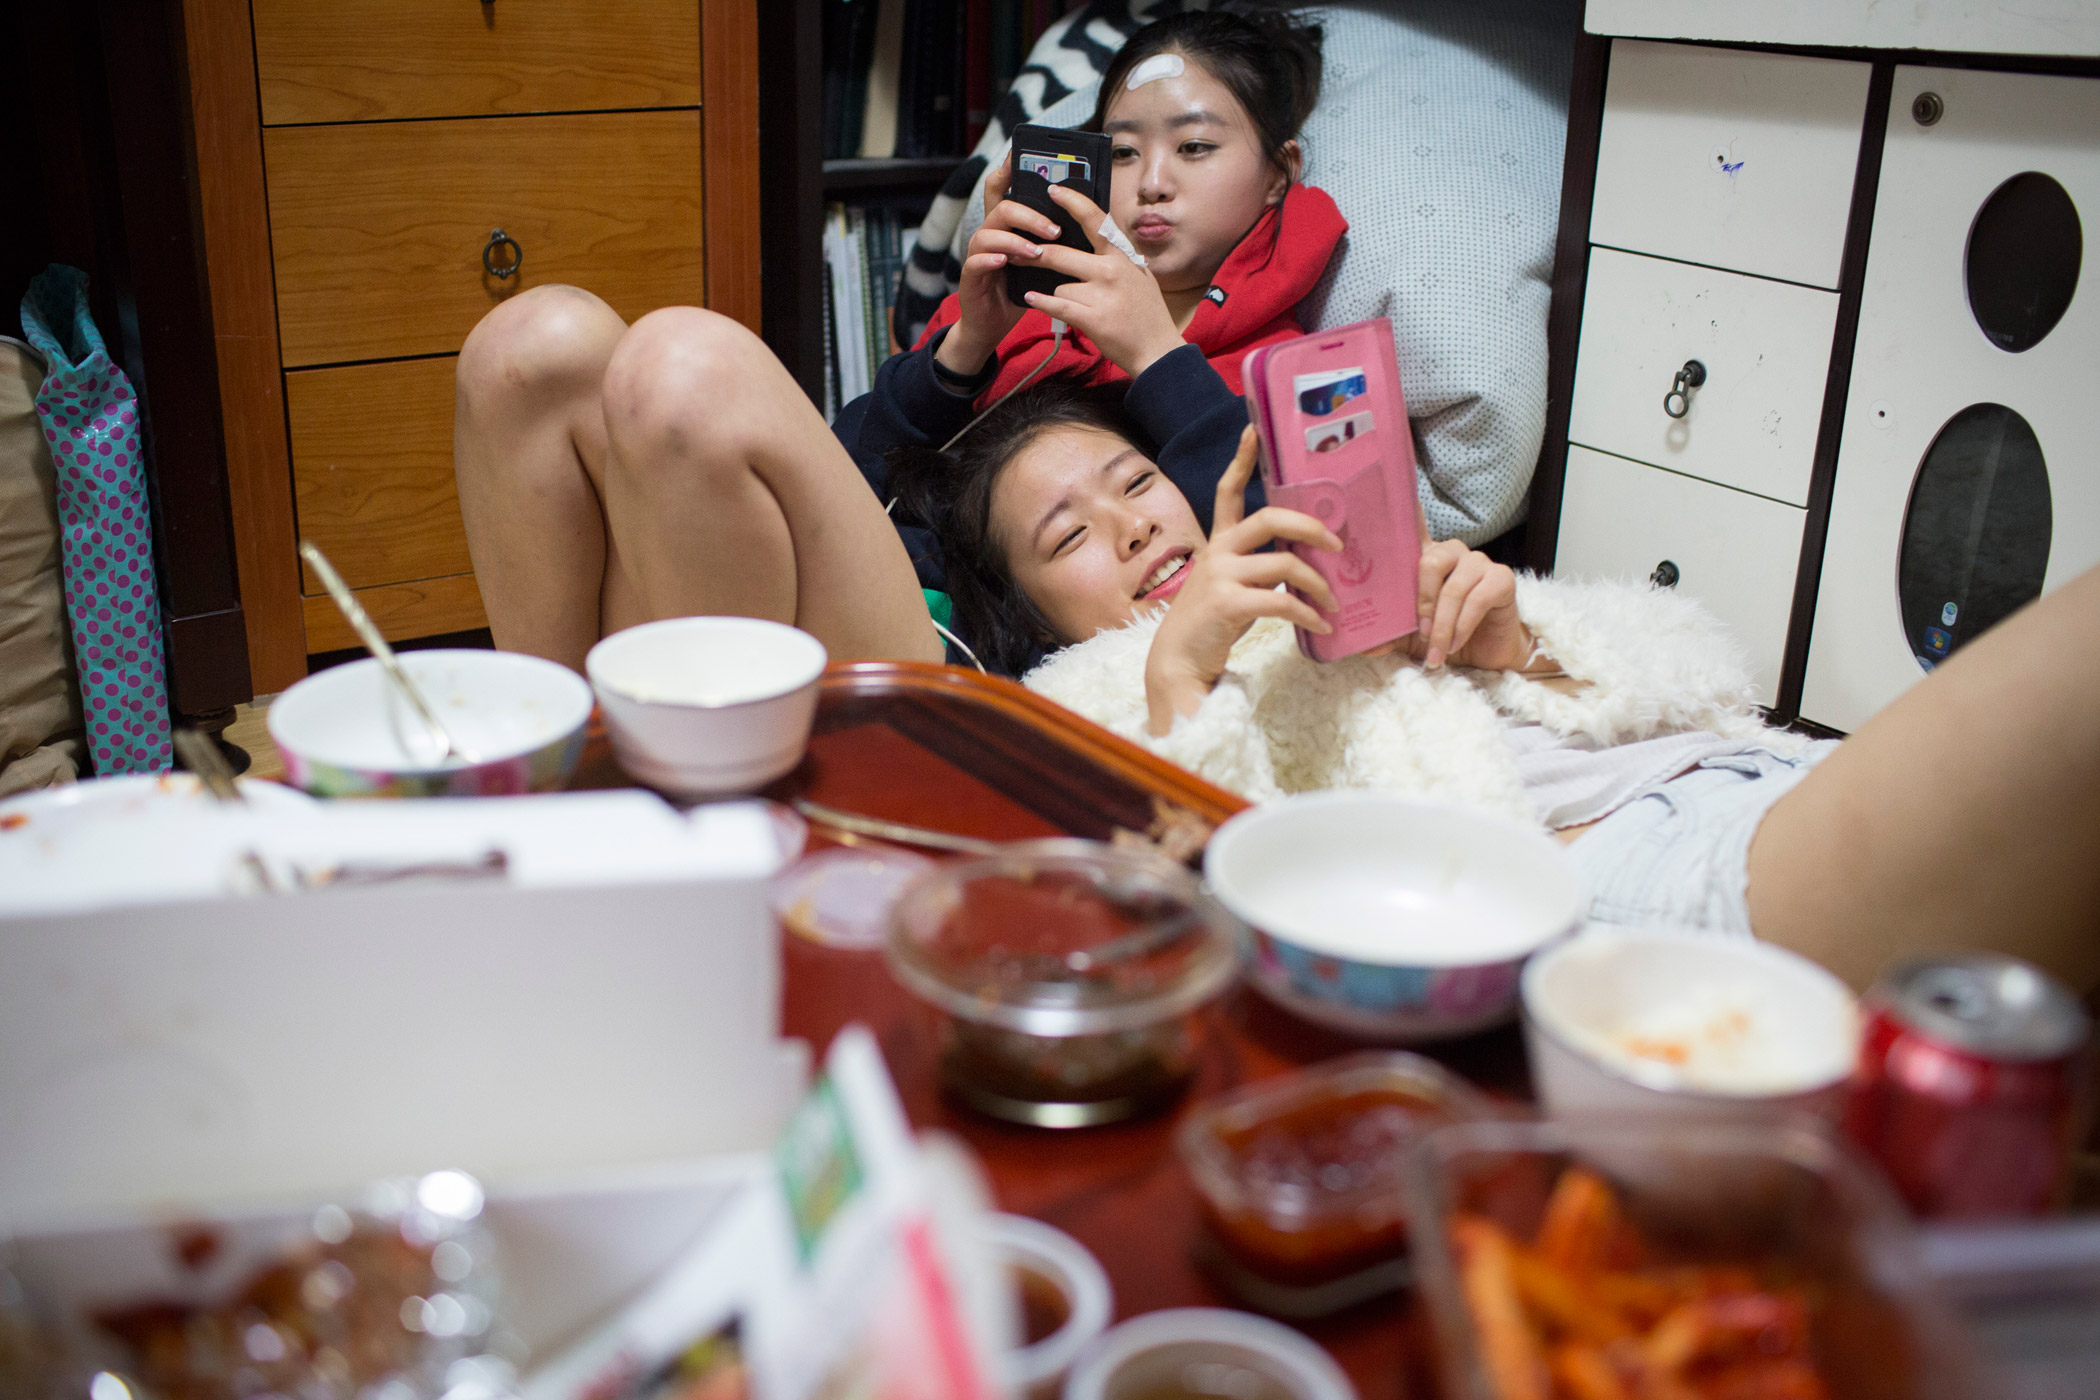 Kyong-ok and Sarah spend time on their phones after sharing takeout for dinner at Kyong-ok's apartment on Feb. 28, 2015 in Mia, Seoul, South Korea. Caitlin O'Hara